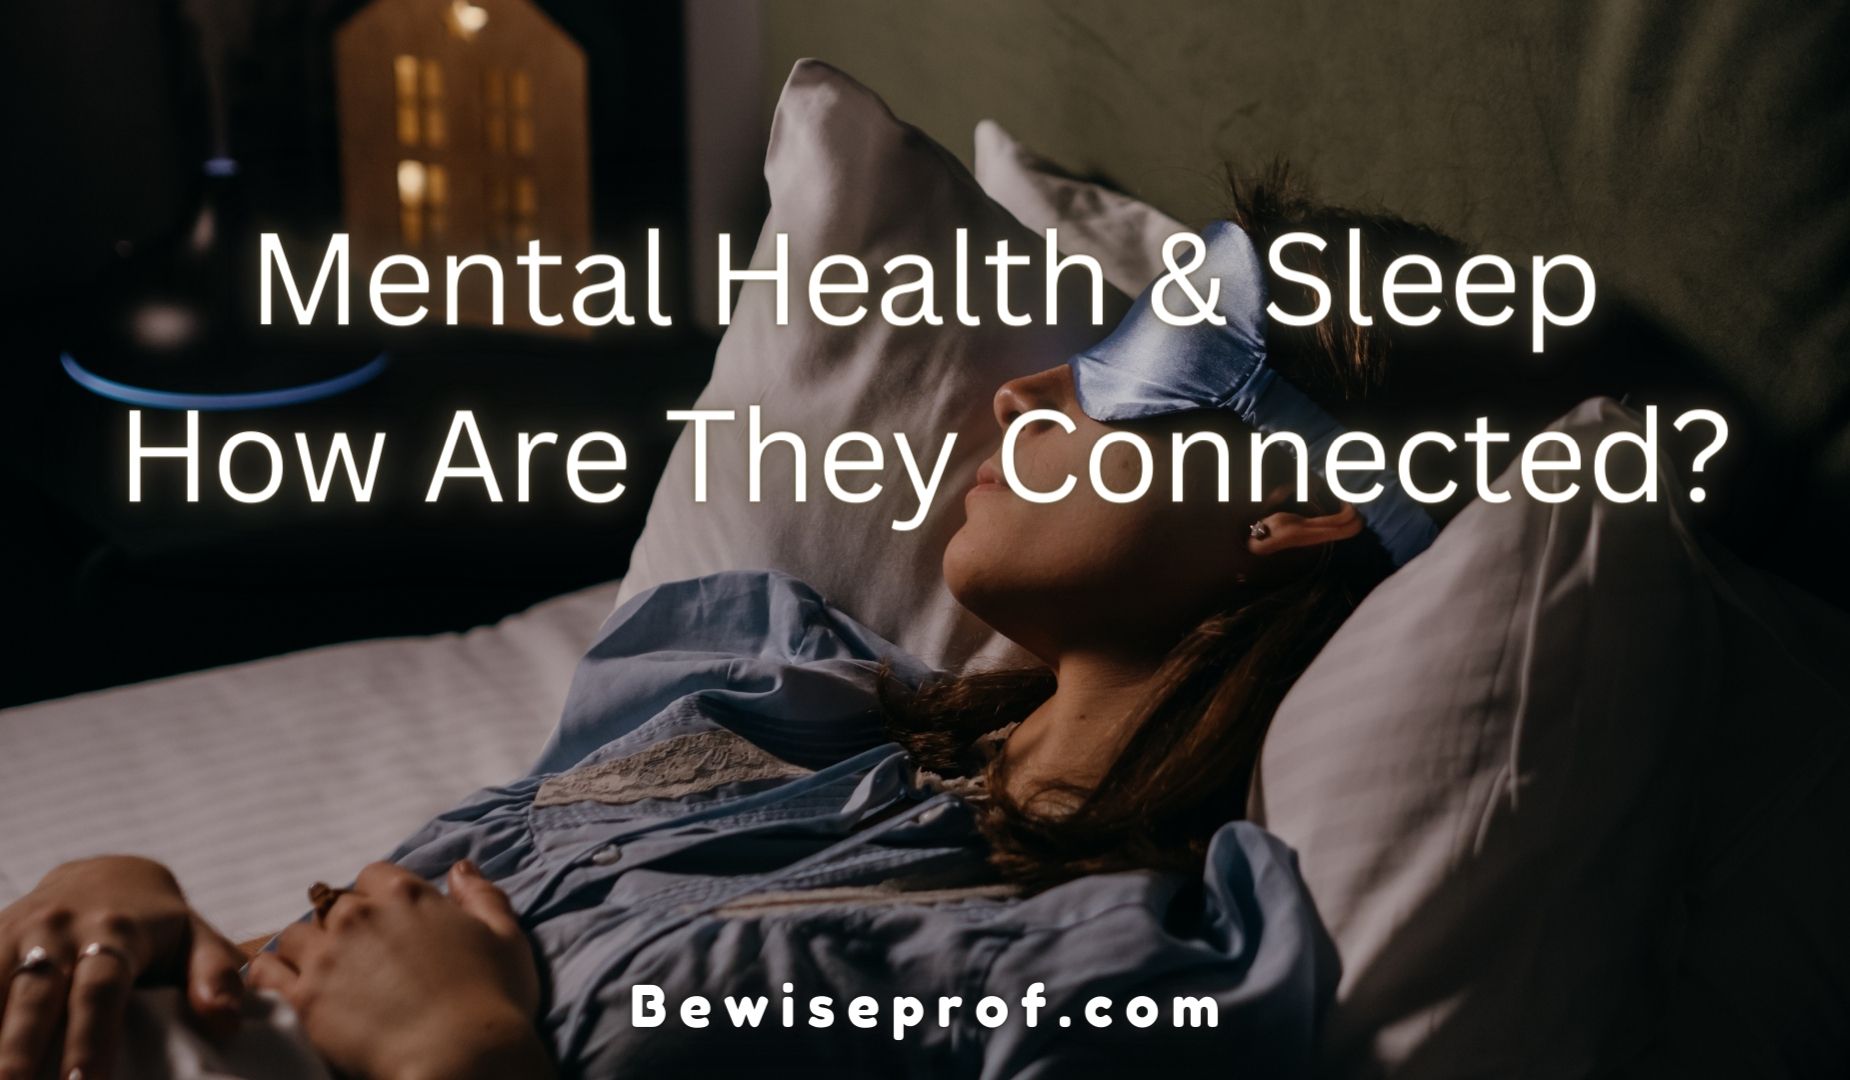 Mental Health And Sleep: How Are They Connected?